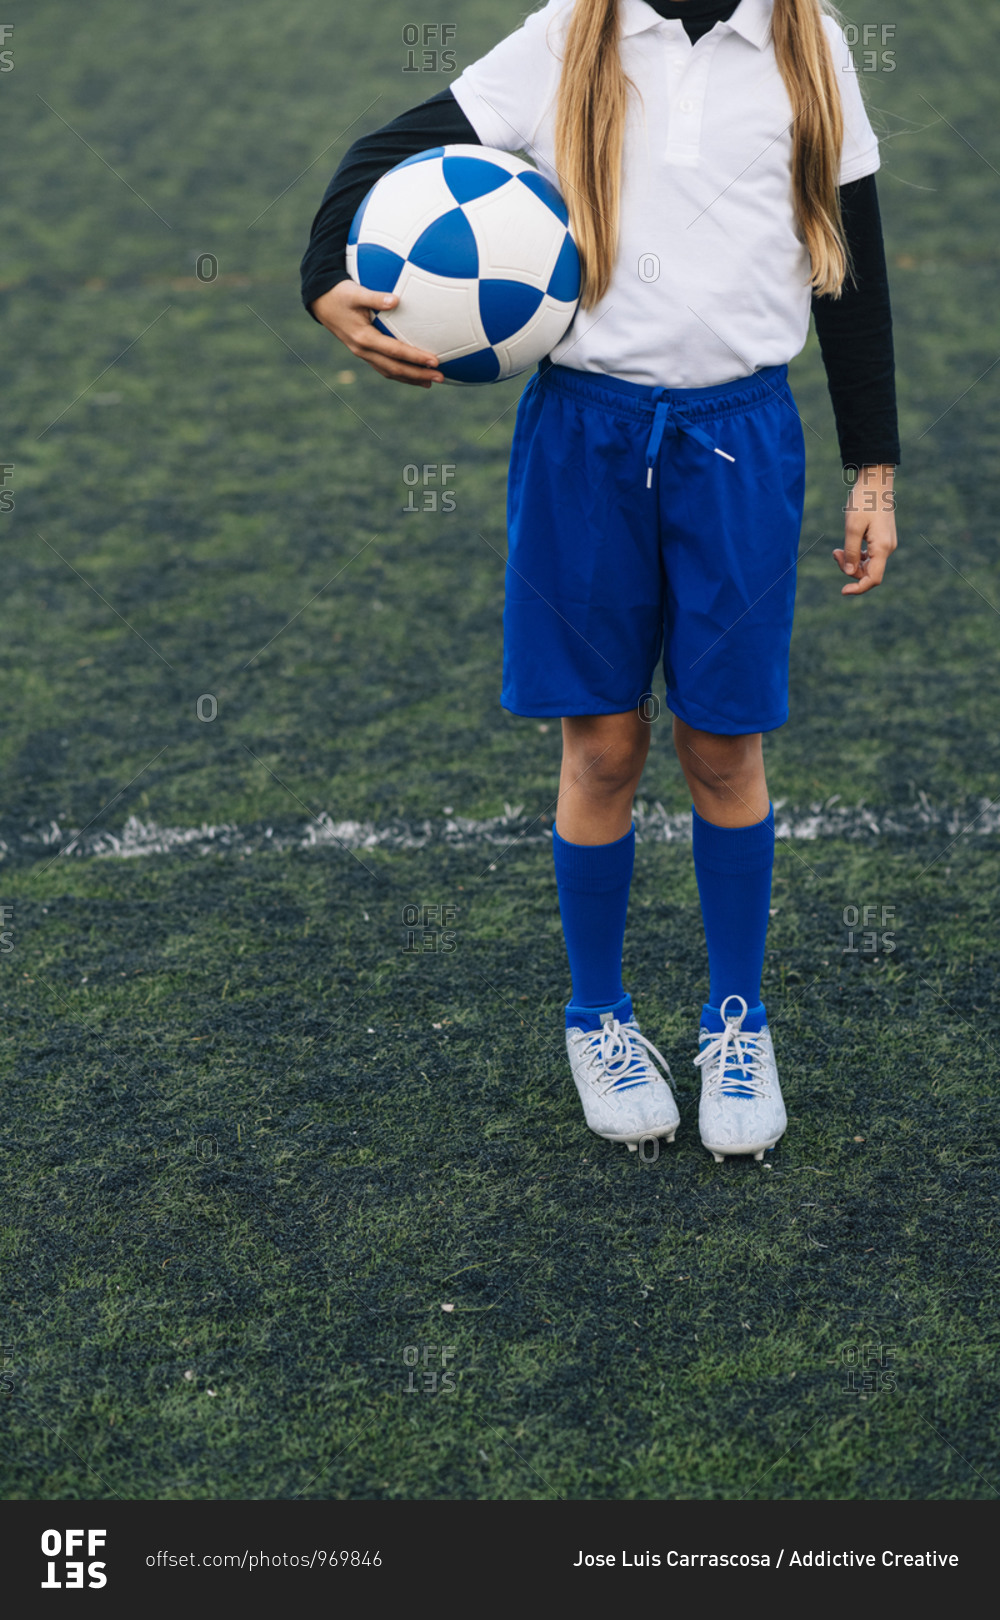 Crop girl in white and blue uniform with soccer ball while standing alone on green field in modern sports club